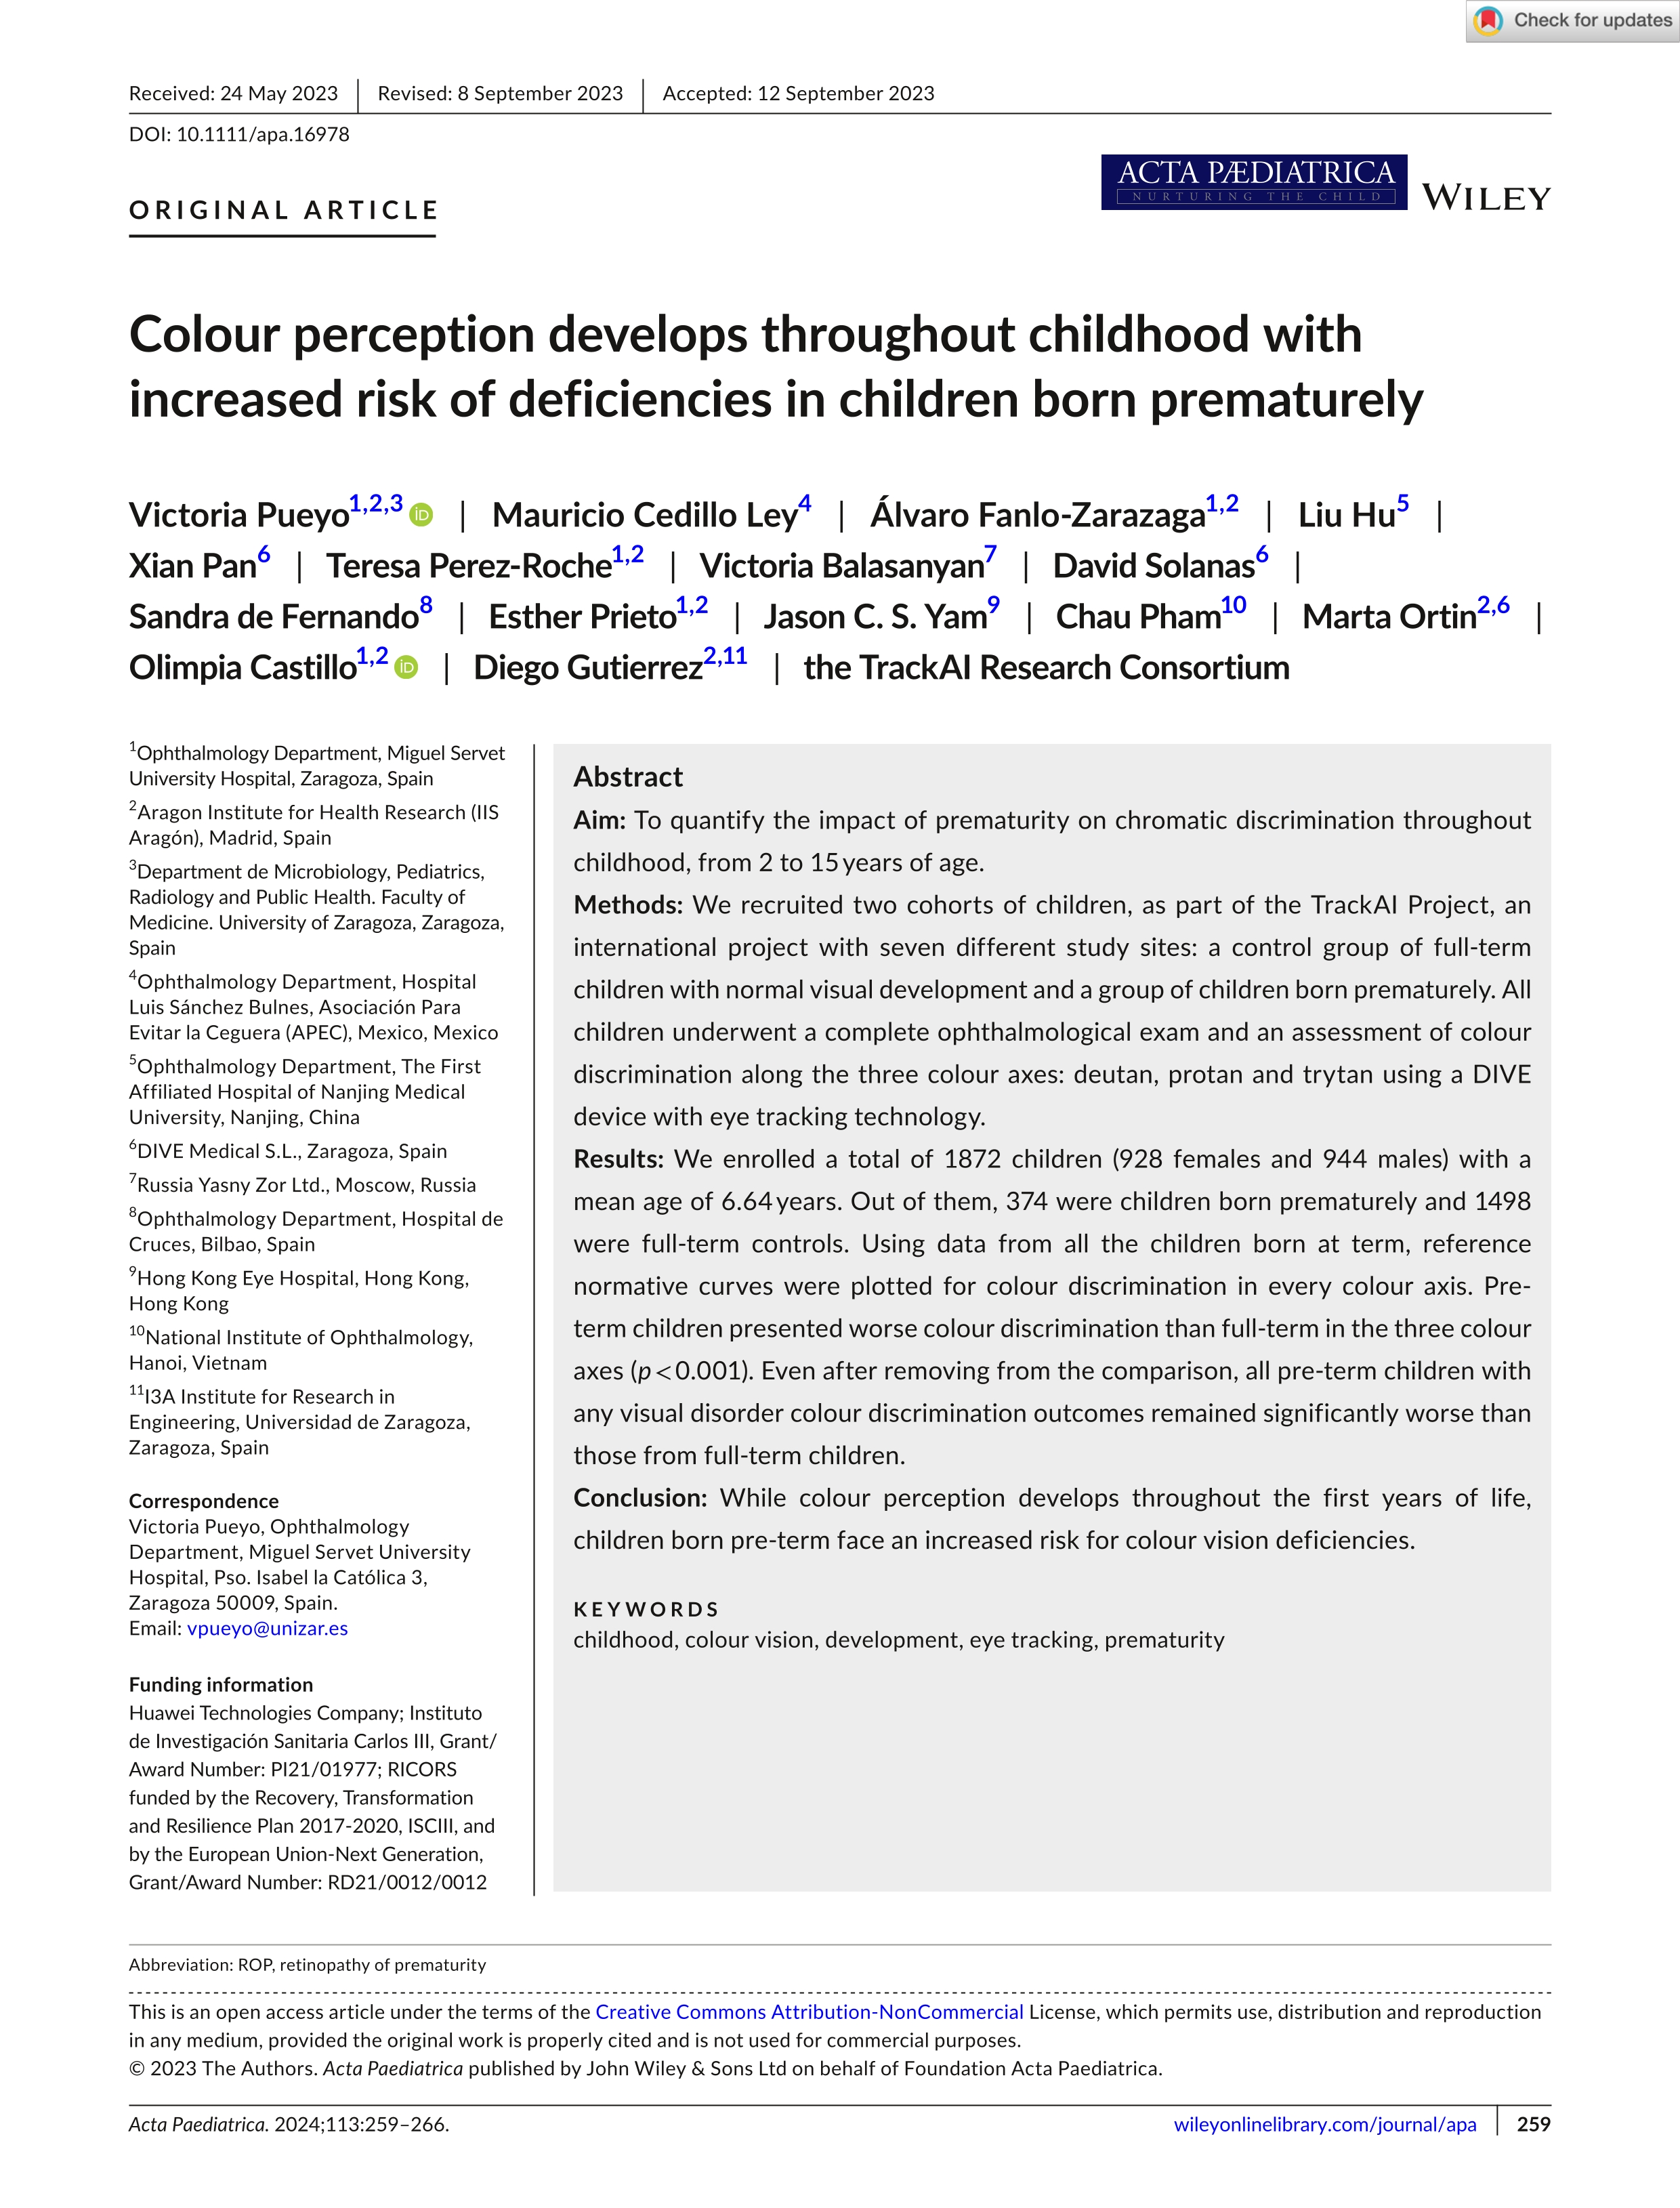 Colour perception develops throughout childhood with increased risk of deficiencies in children born prematurely